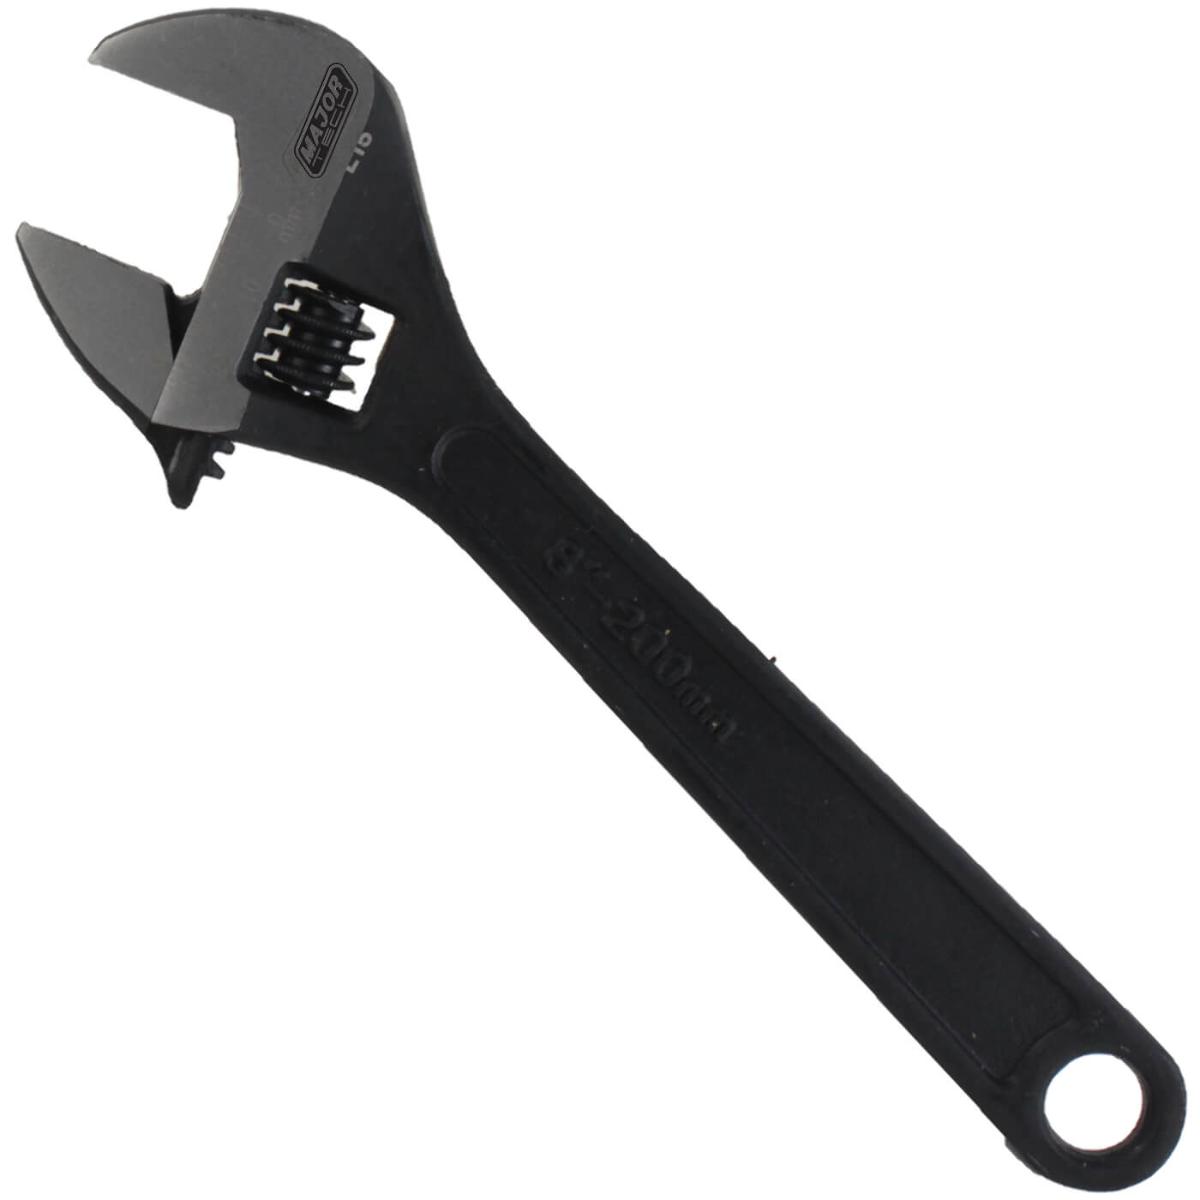 ADJUSTABLE WRENCH SPANNER 200mm 8IN